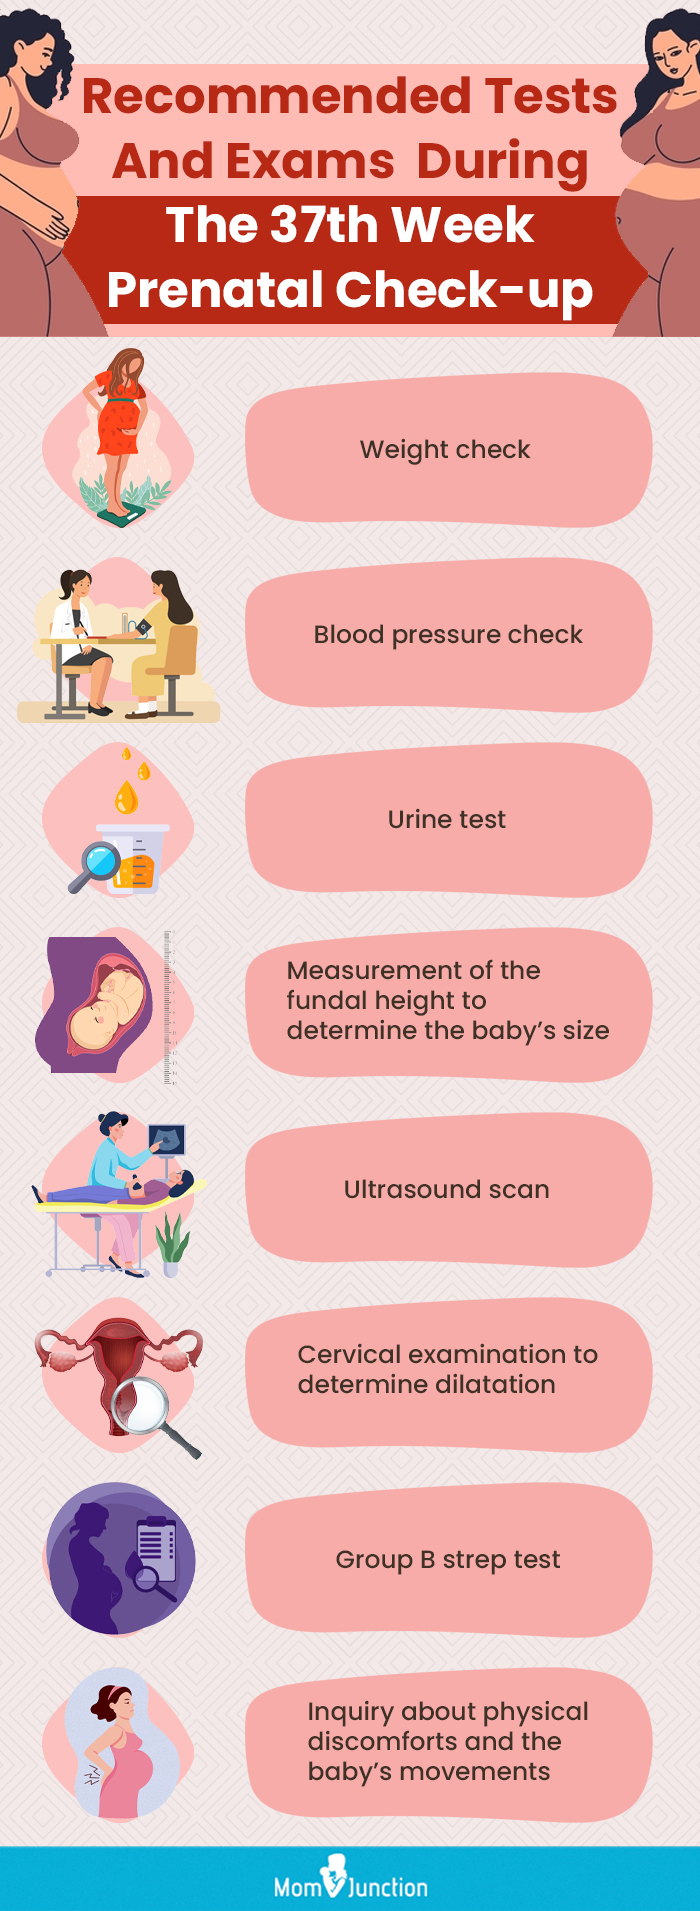 recommended tests and exams during the 37th week prenatal check up (infographic)